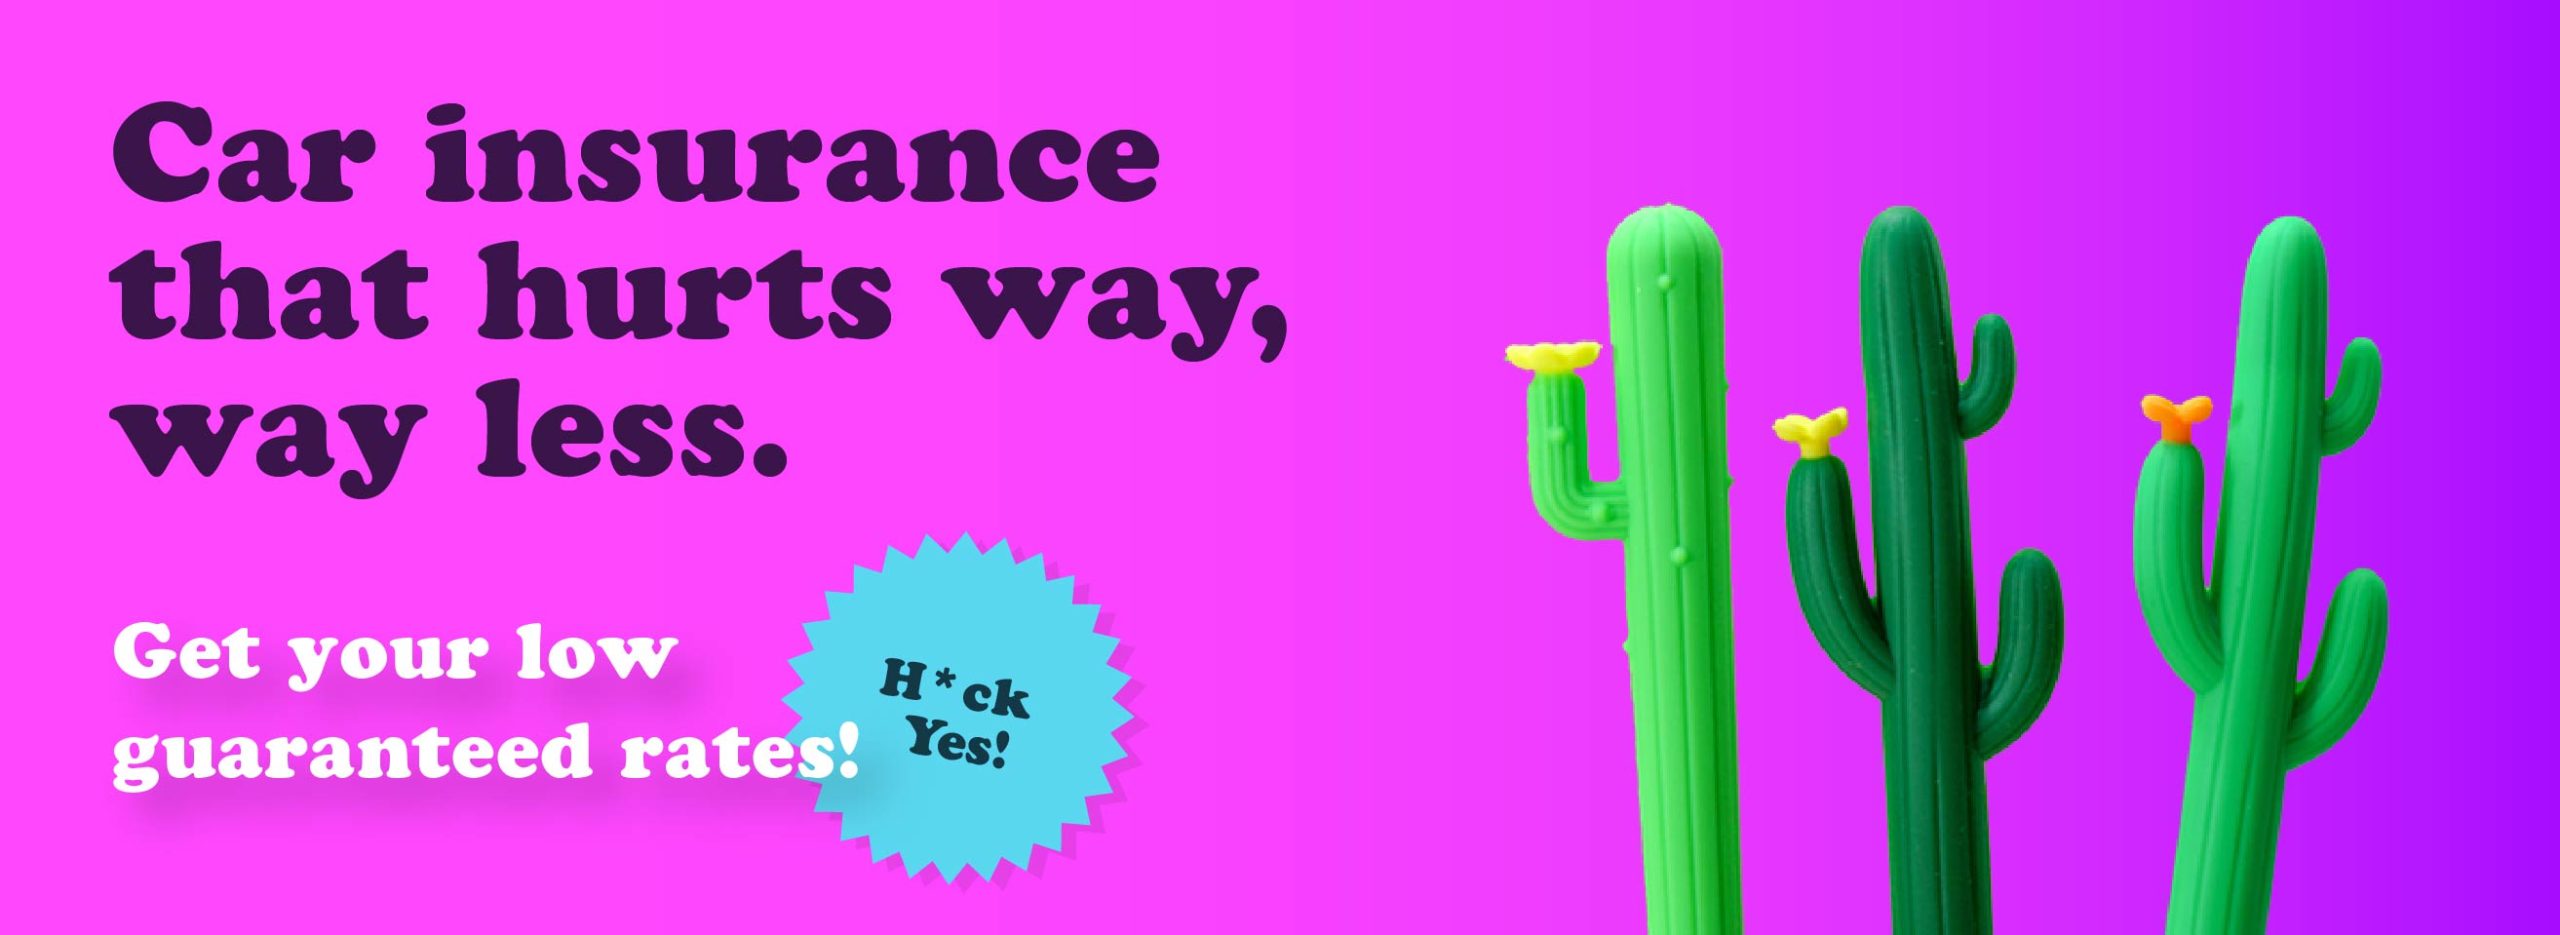 Image of three cacti with text that reads: "Car insurance that hurts way, way less. Get your low guaranteed rates!"